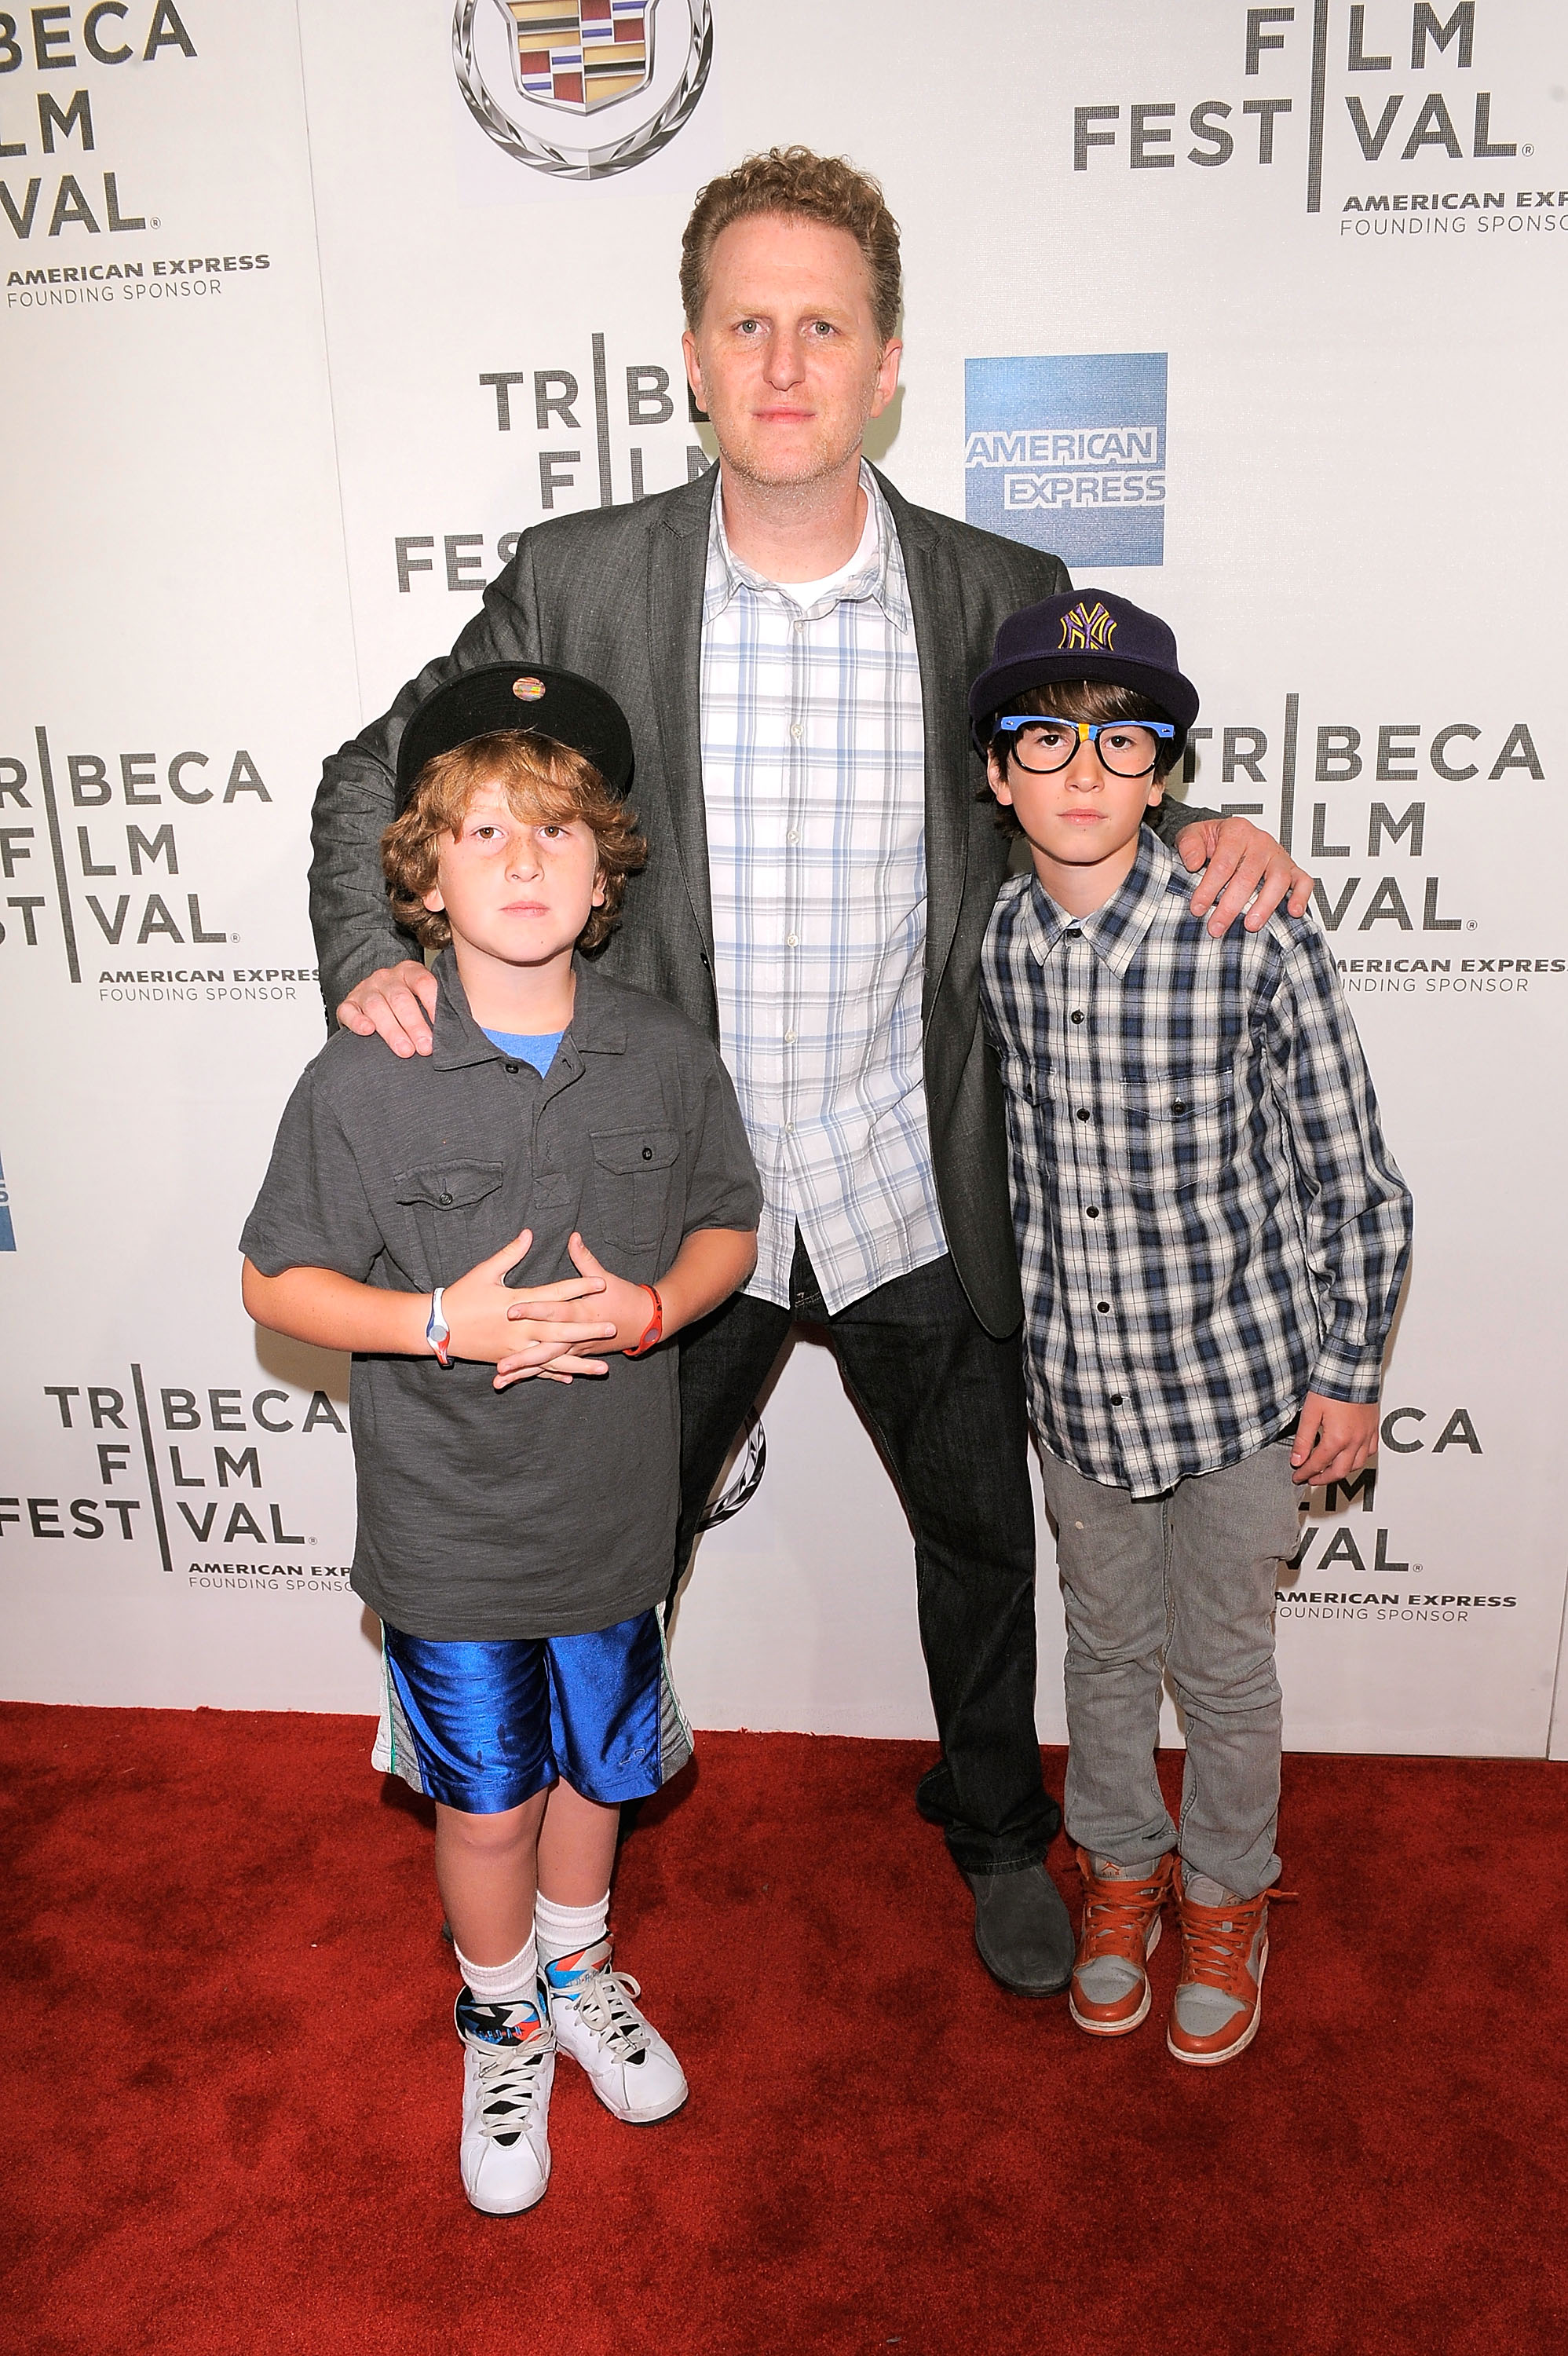 Michael Rapaport with his kids Julian and Maceo attend the premiere of "Beats, Rhymes & Life: The Travels of a Tribe Called Quest" during the 2011 Tribeca Film Festival at BMCC Tribeca PAC on April 27, 2011, in New York City. | Source: Getty Images